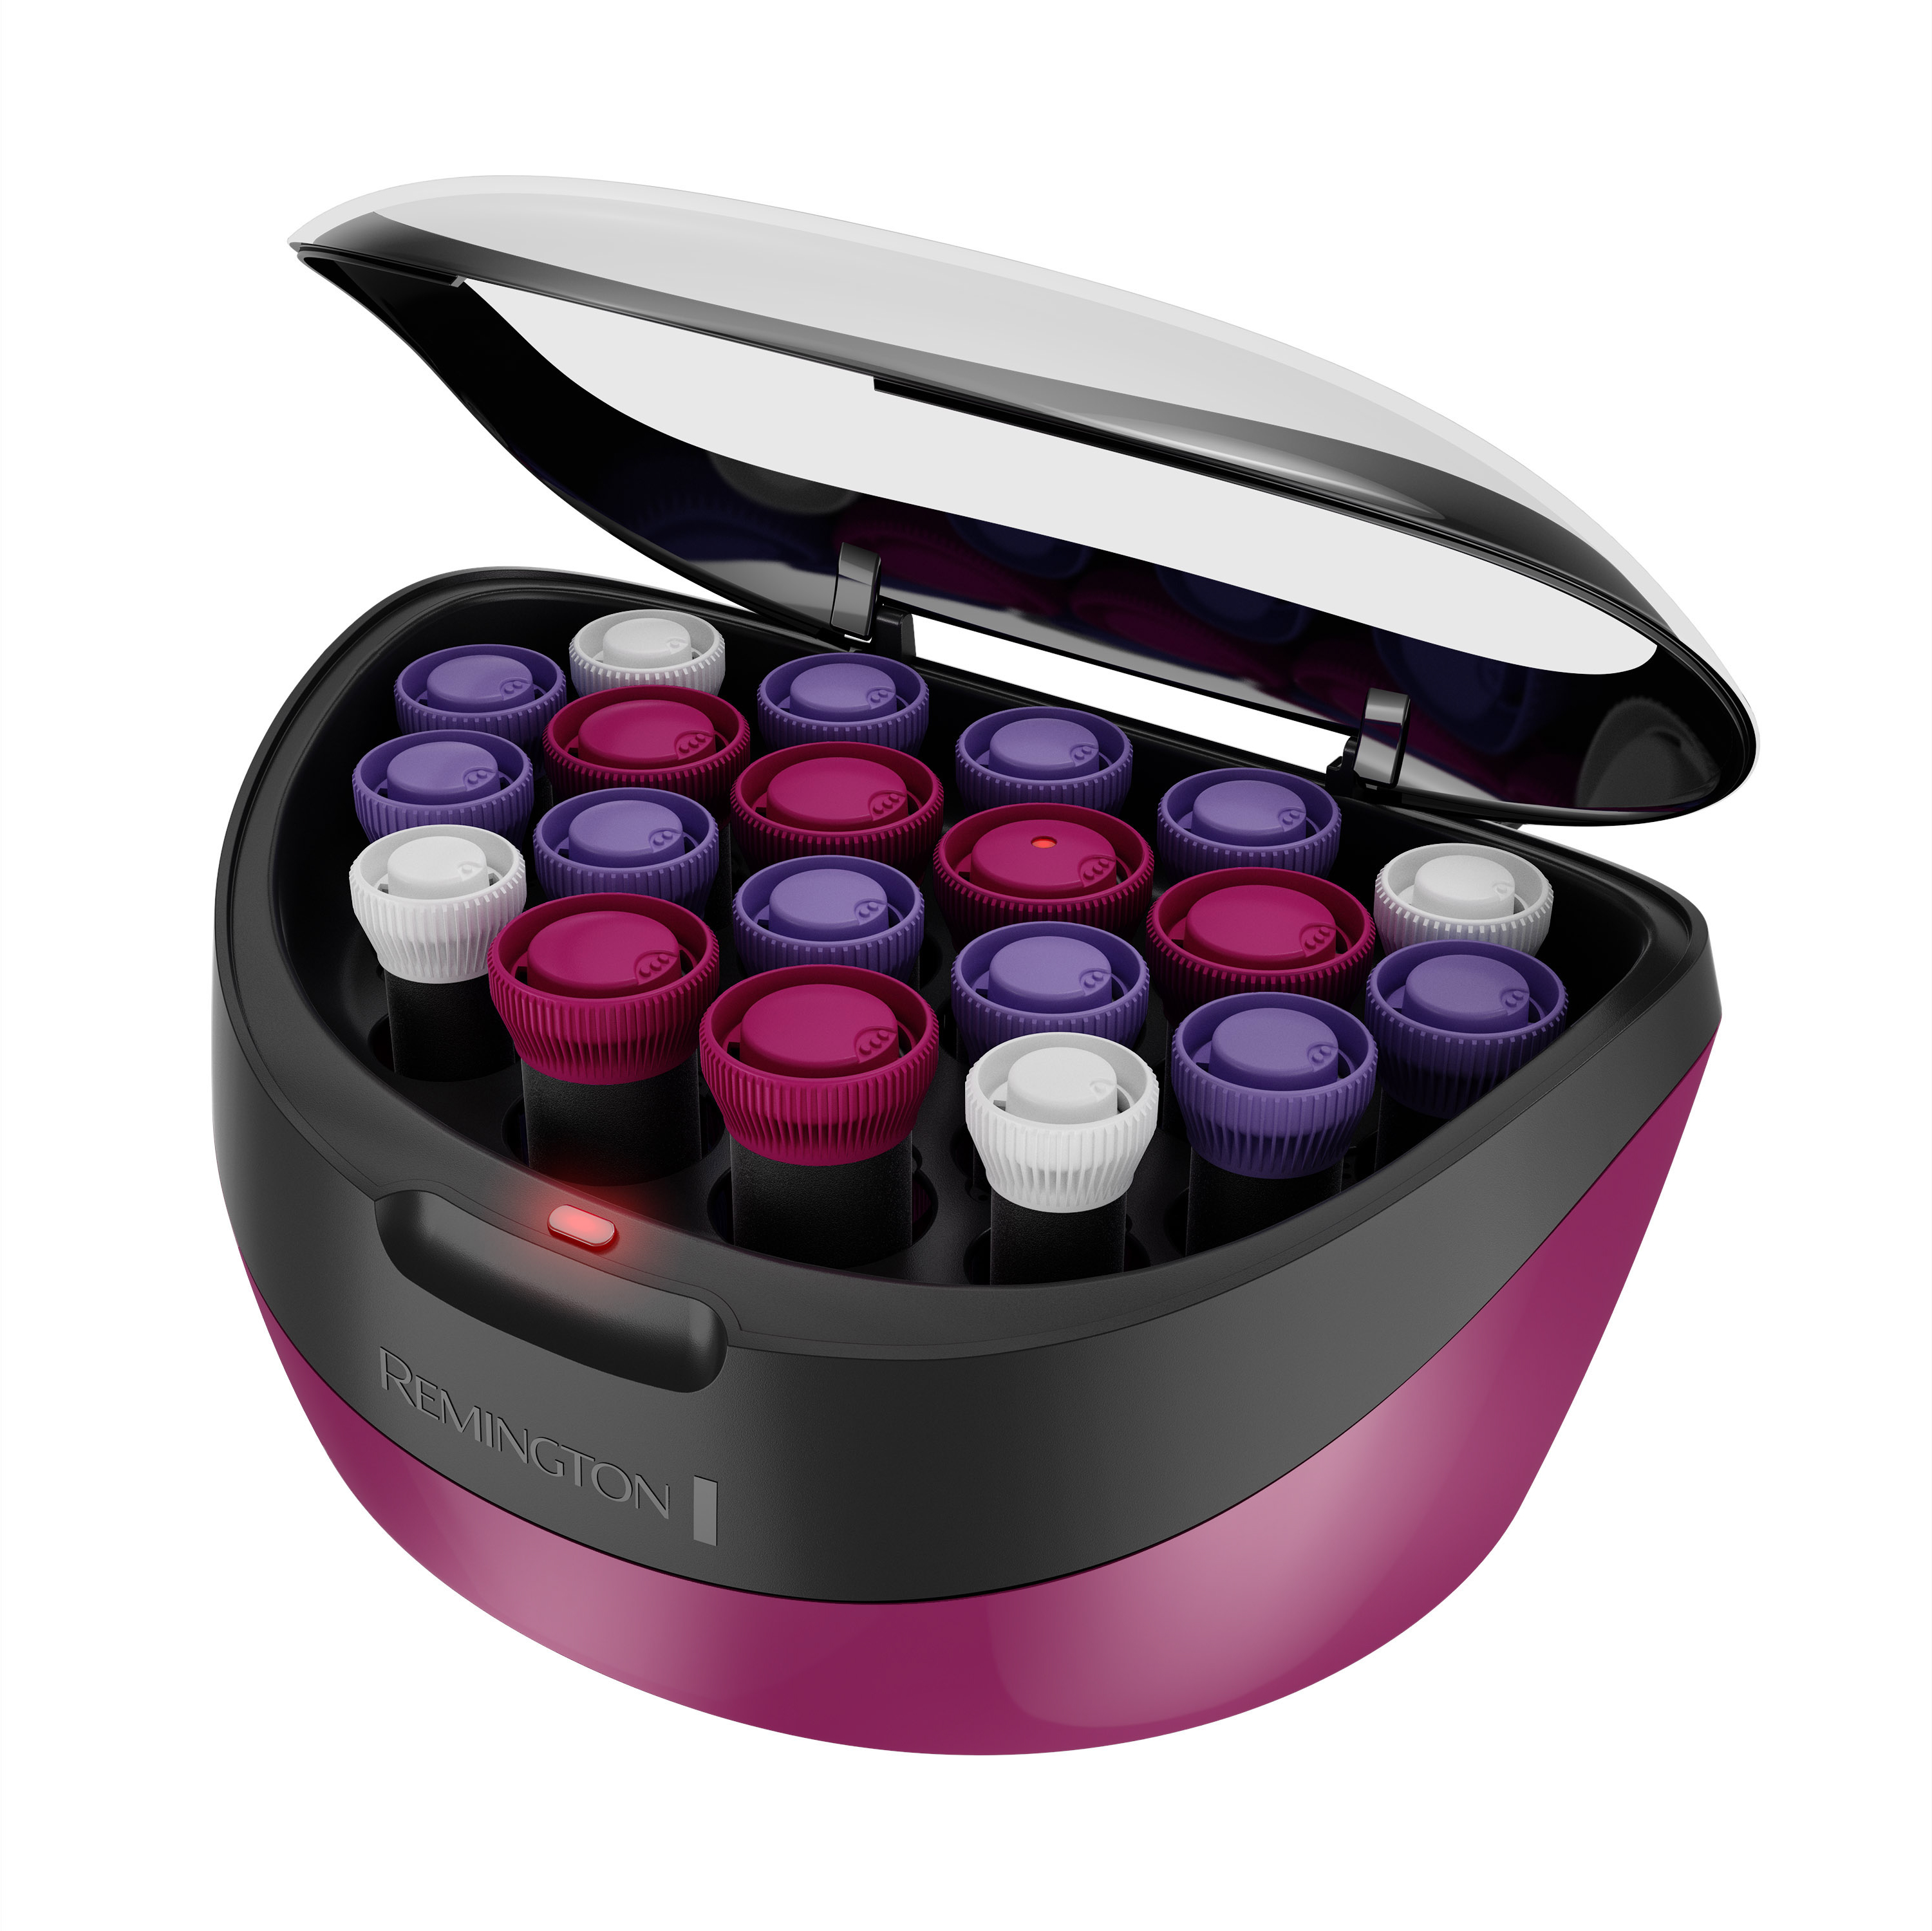 Remington Professional Ceramic Conditioning Hot Hair Rollers, 20 Piece Set, Ionic, Purple, H5600H - image 1 of 14